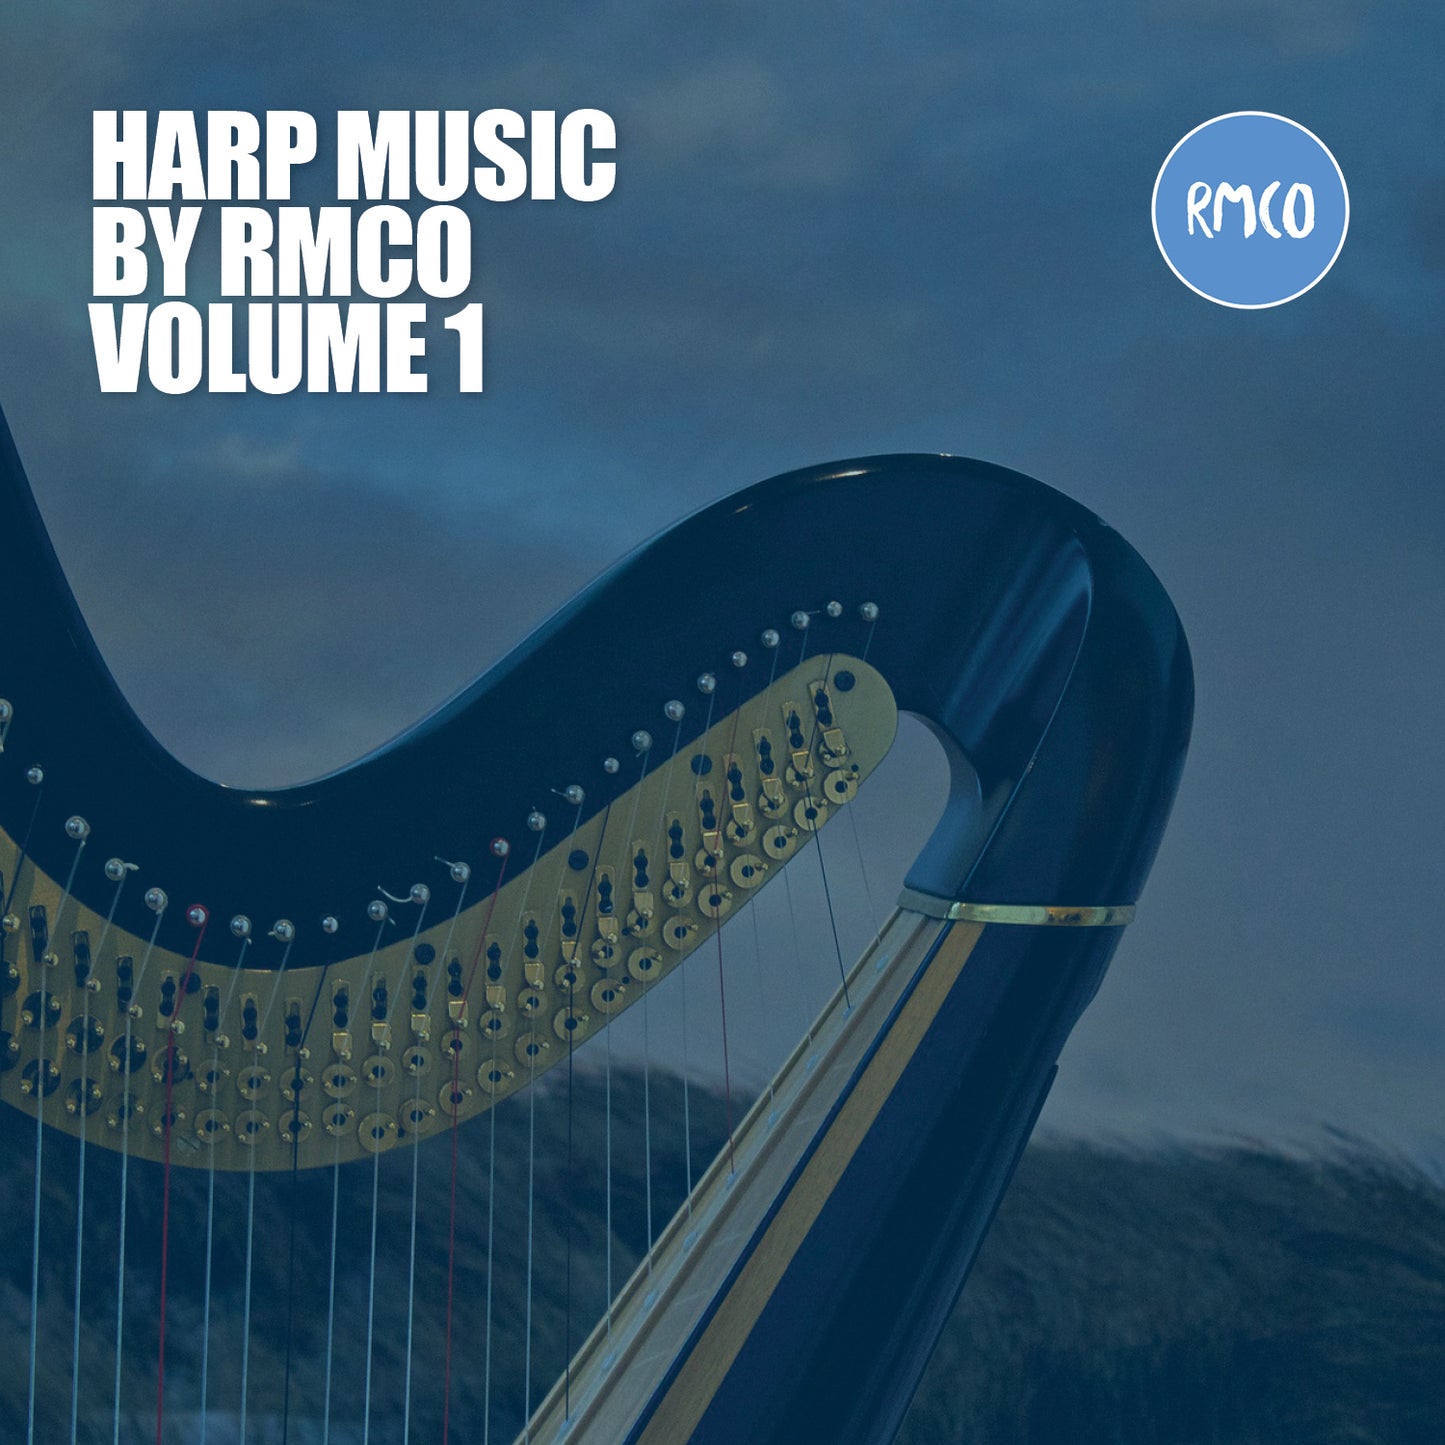 Harp Music, Vol. 1 by RMCO